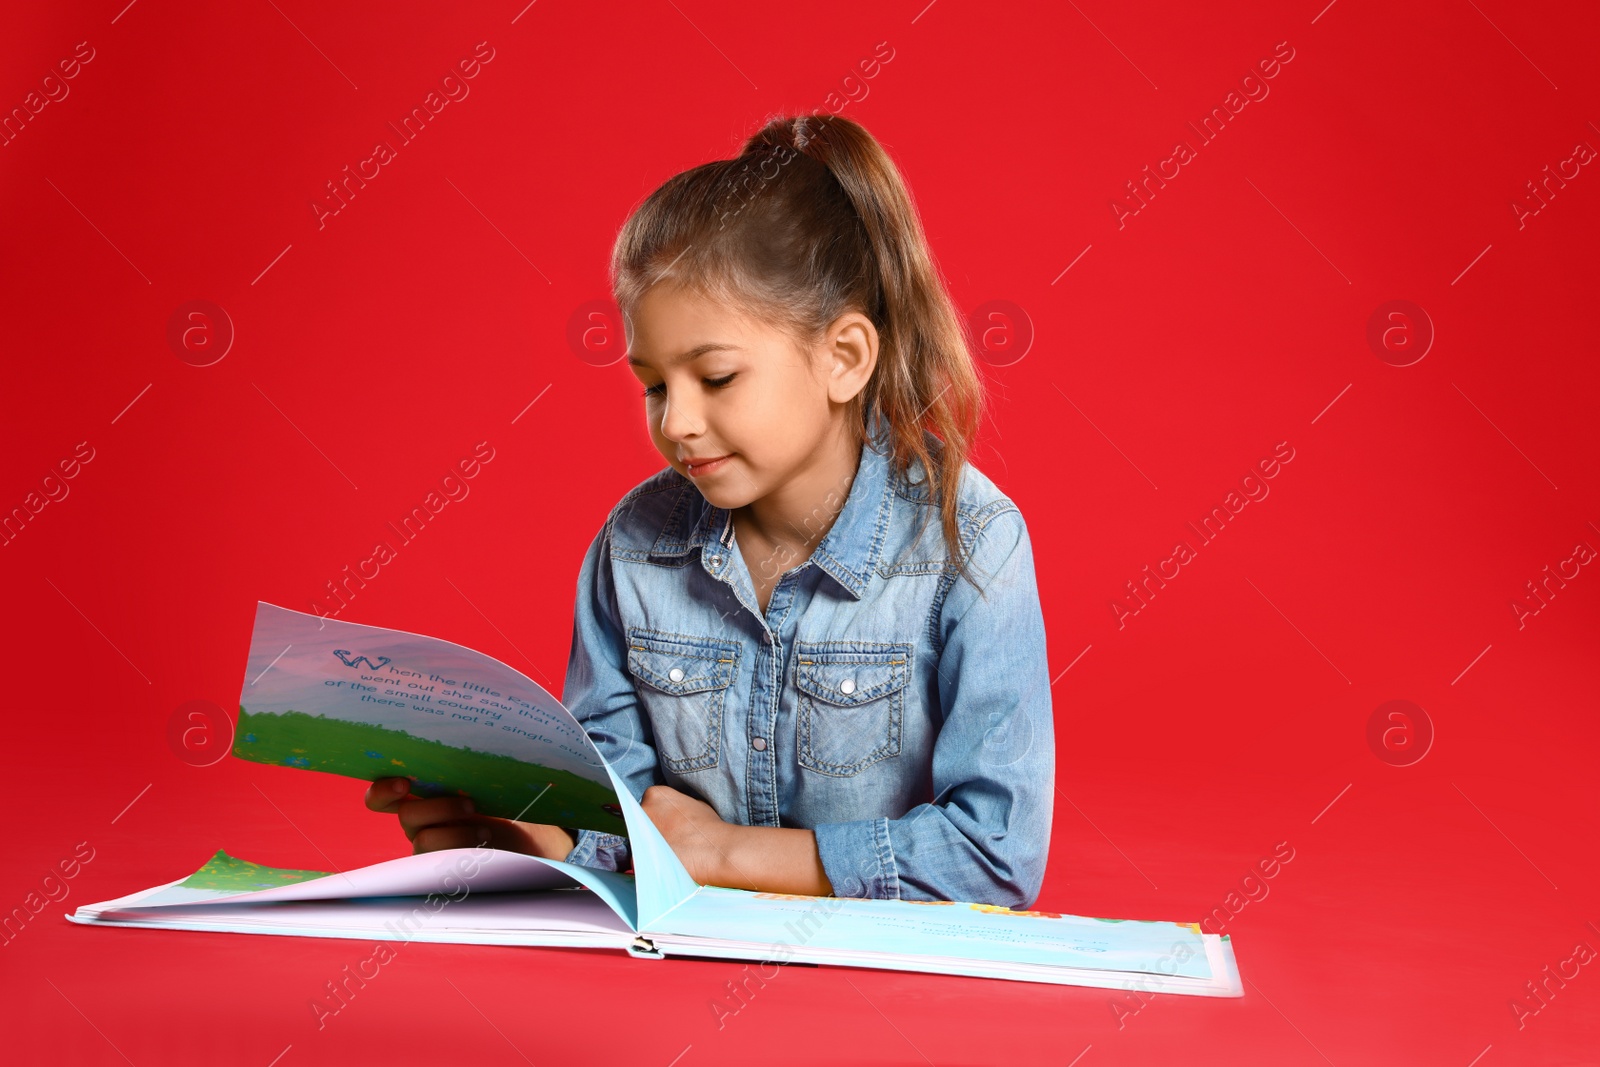 Photo of Cute little girl reading book on red background